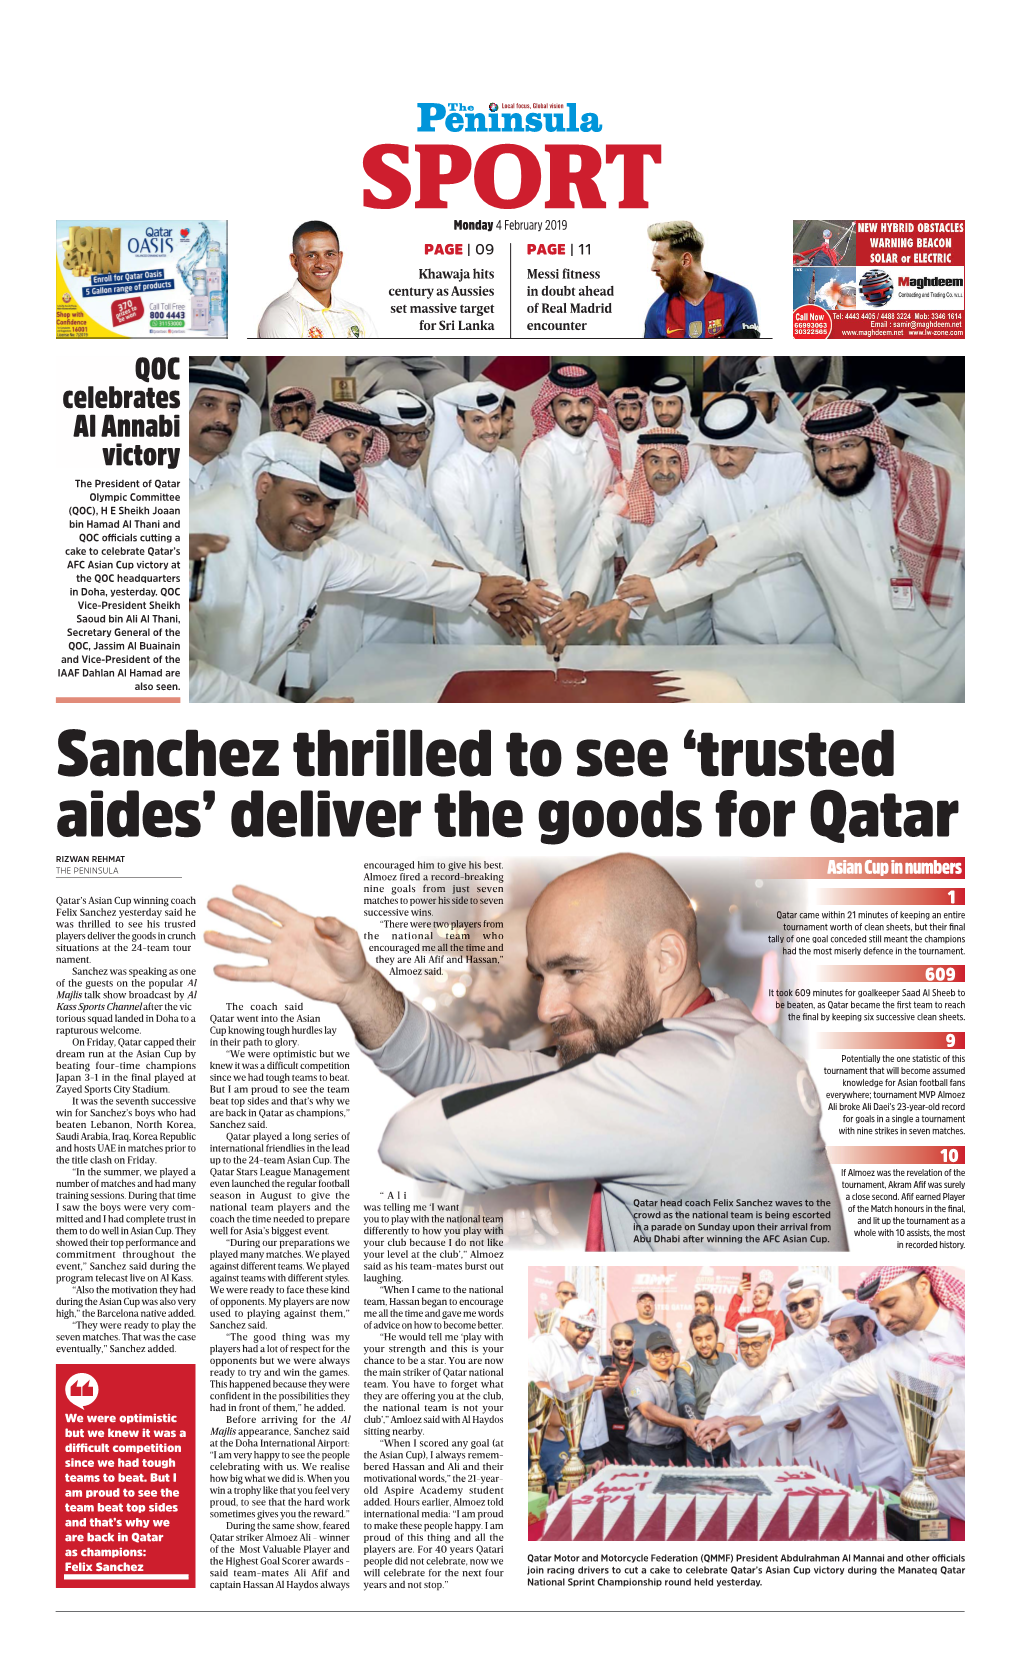 Sanchez Thrilled to See ‘Trusted Aides’ Deliver the Goods for Qatar